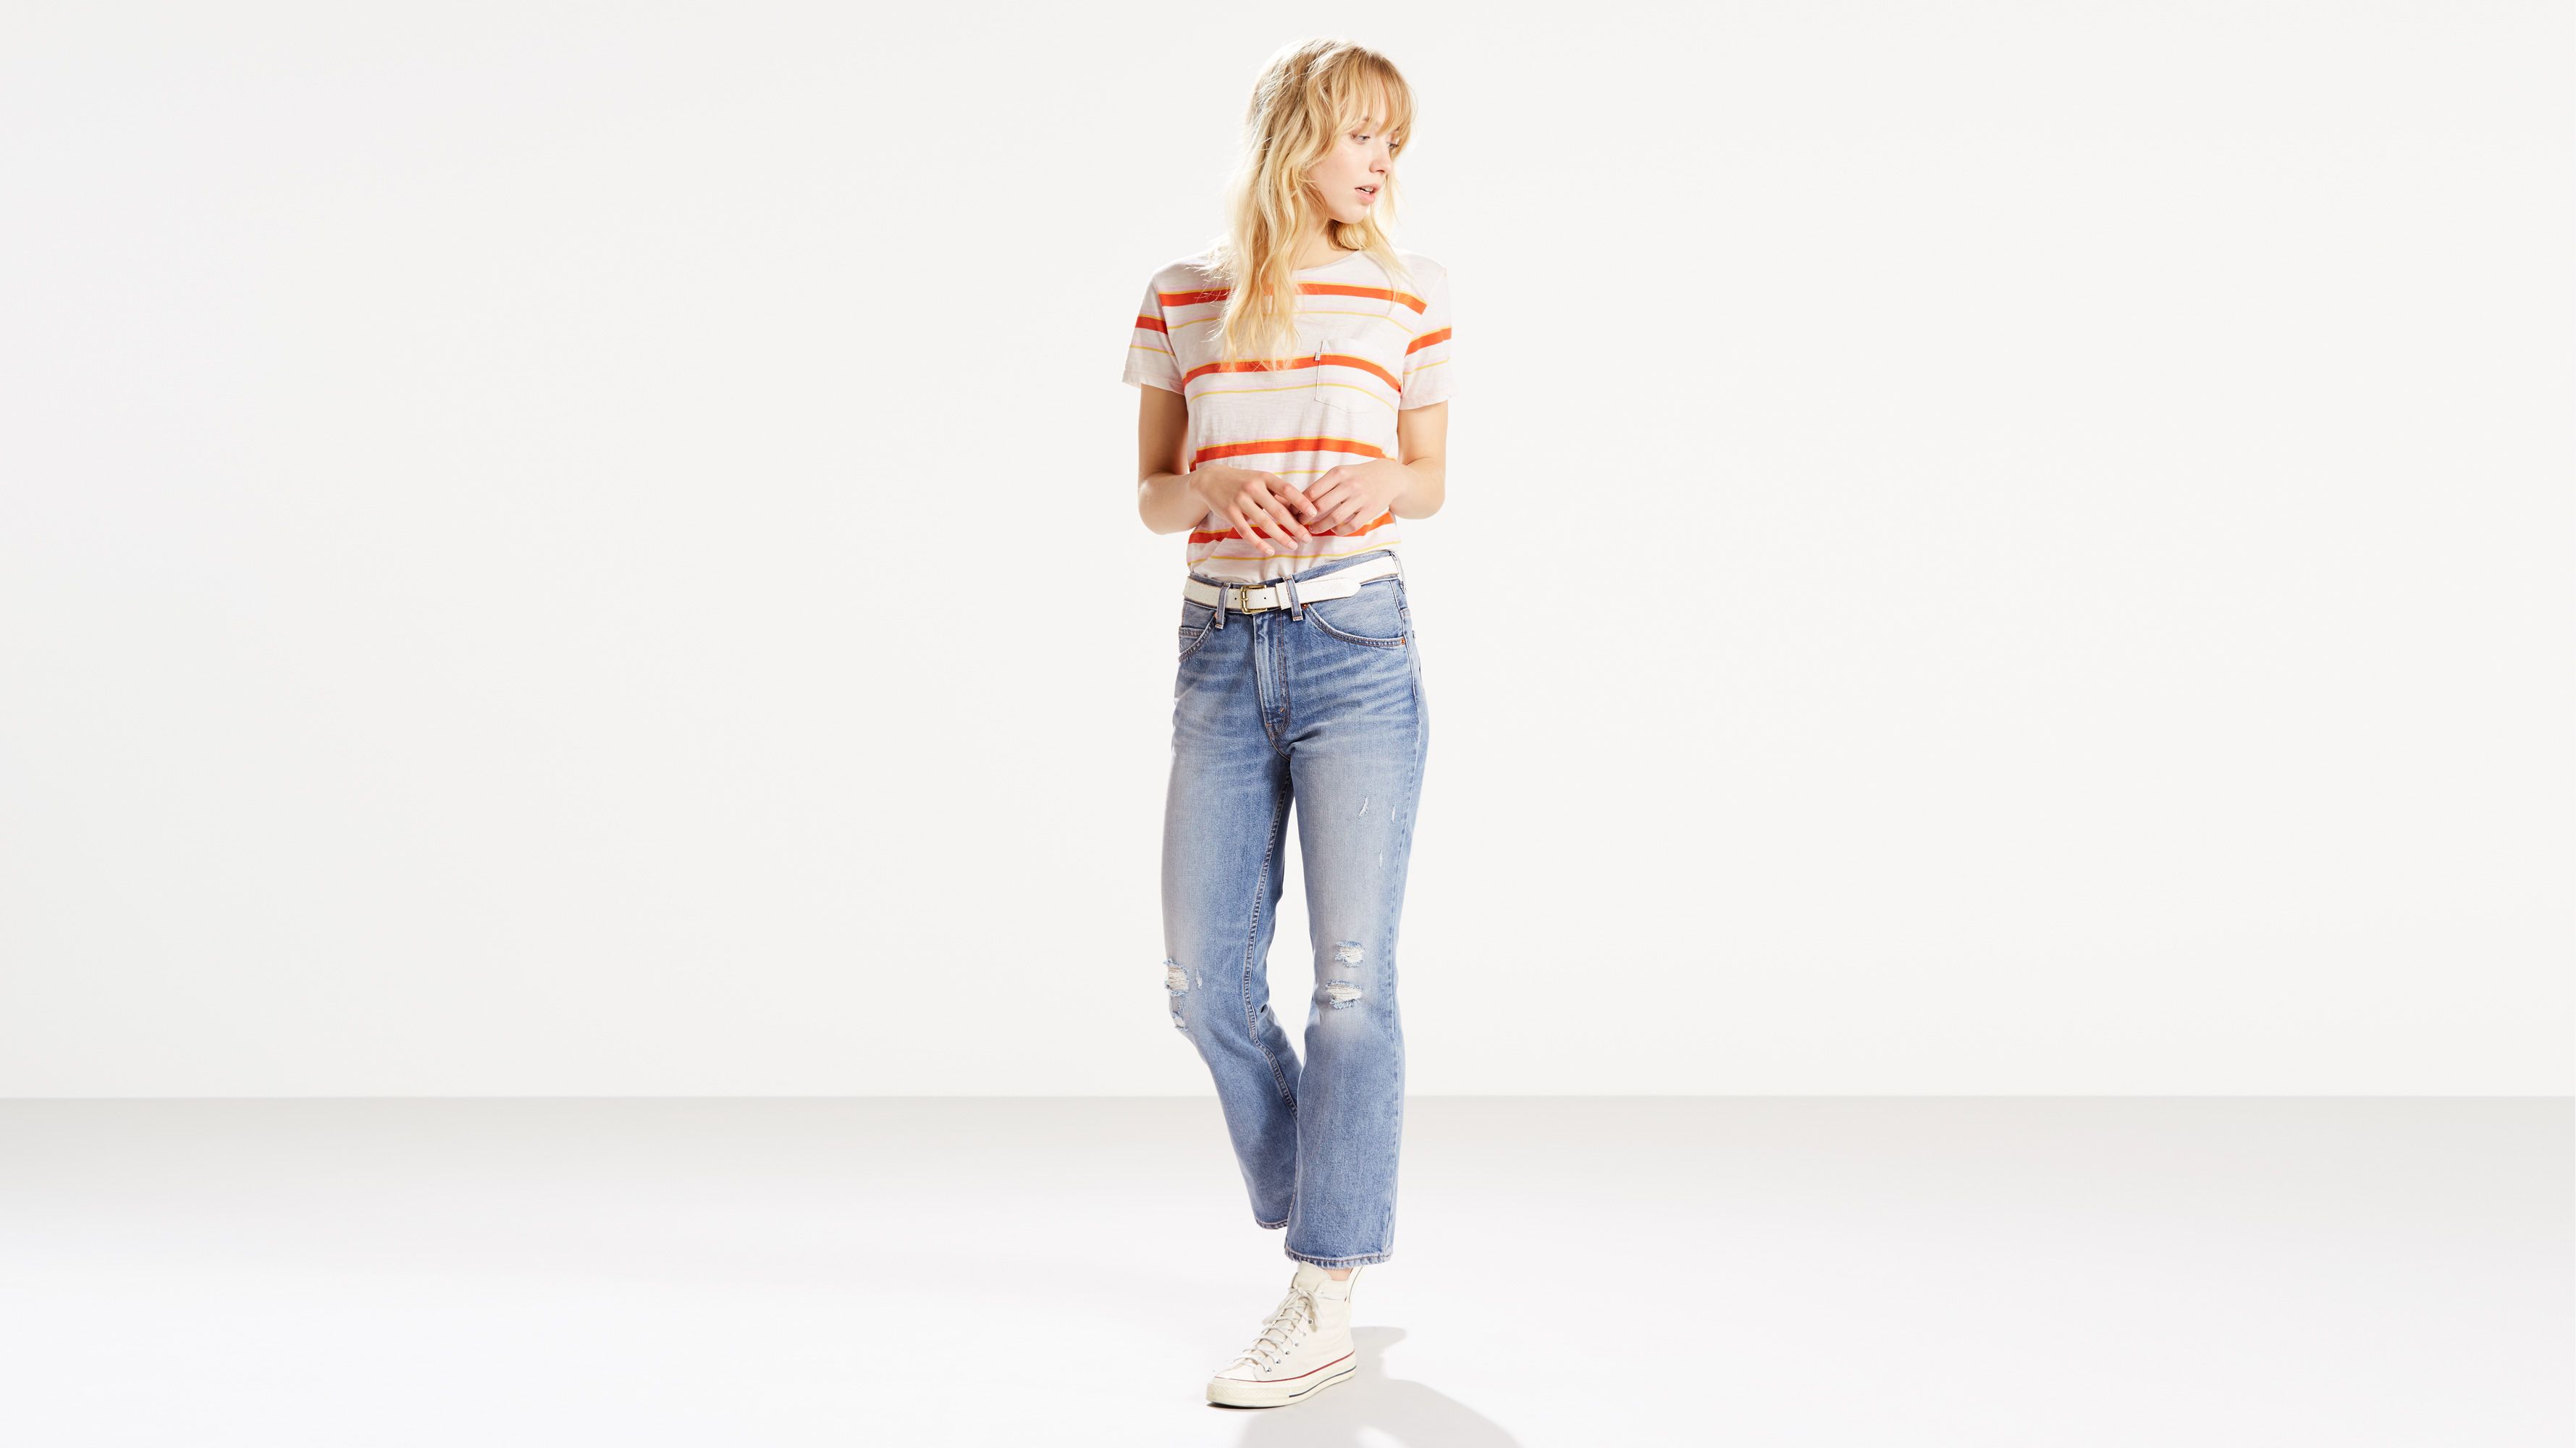 levi's 517 cropped bootcut jeans